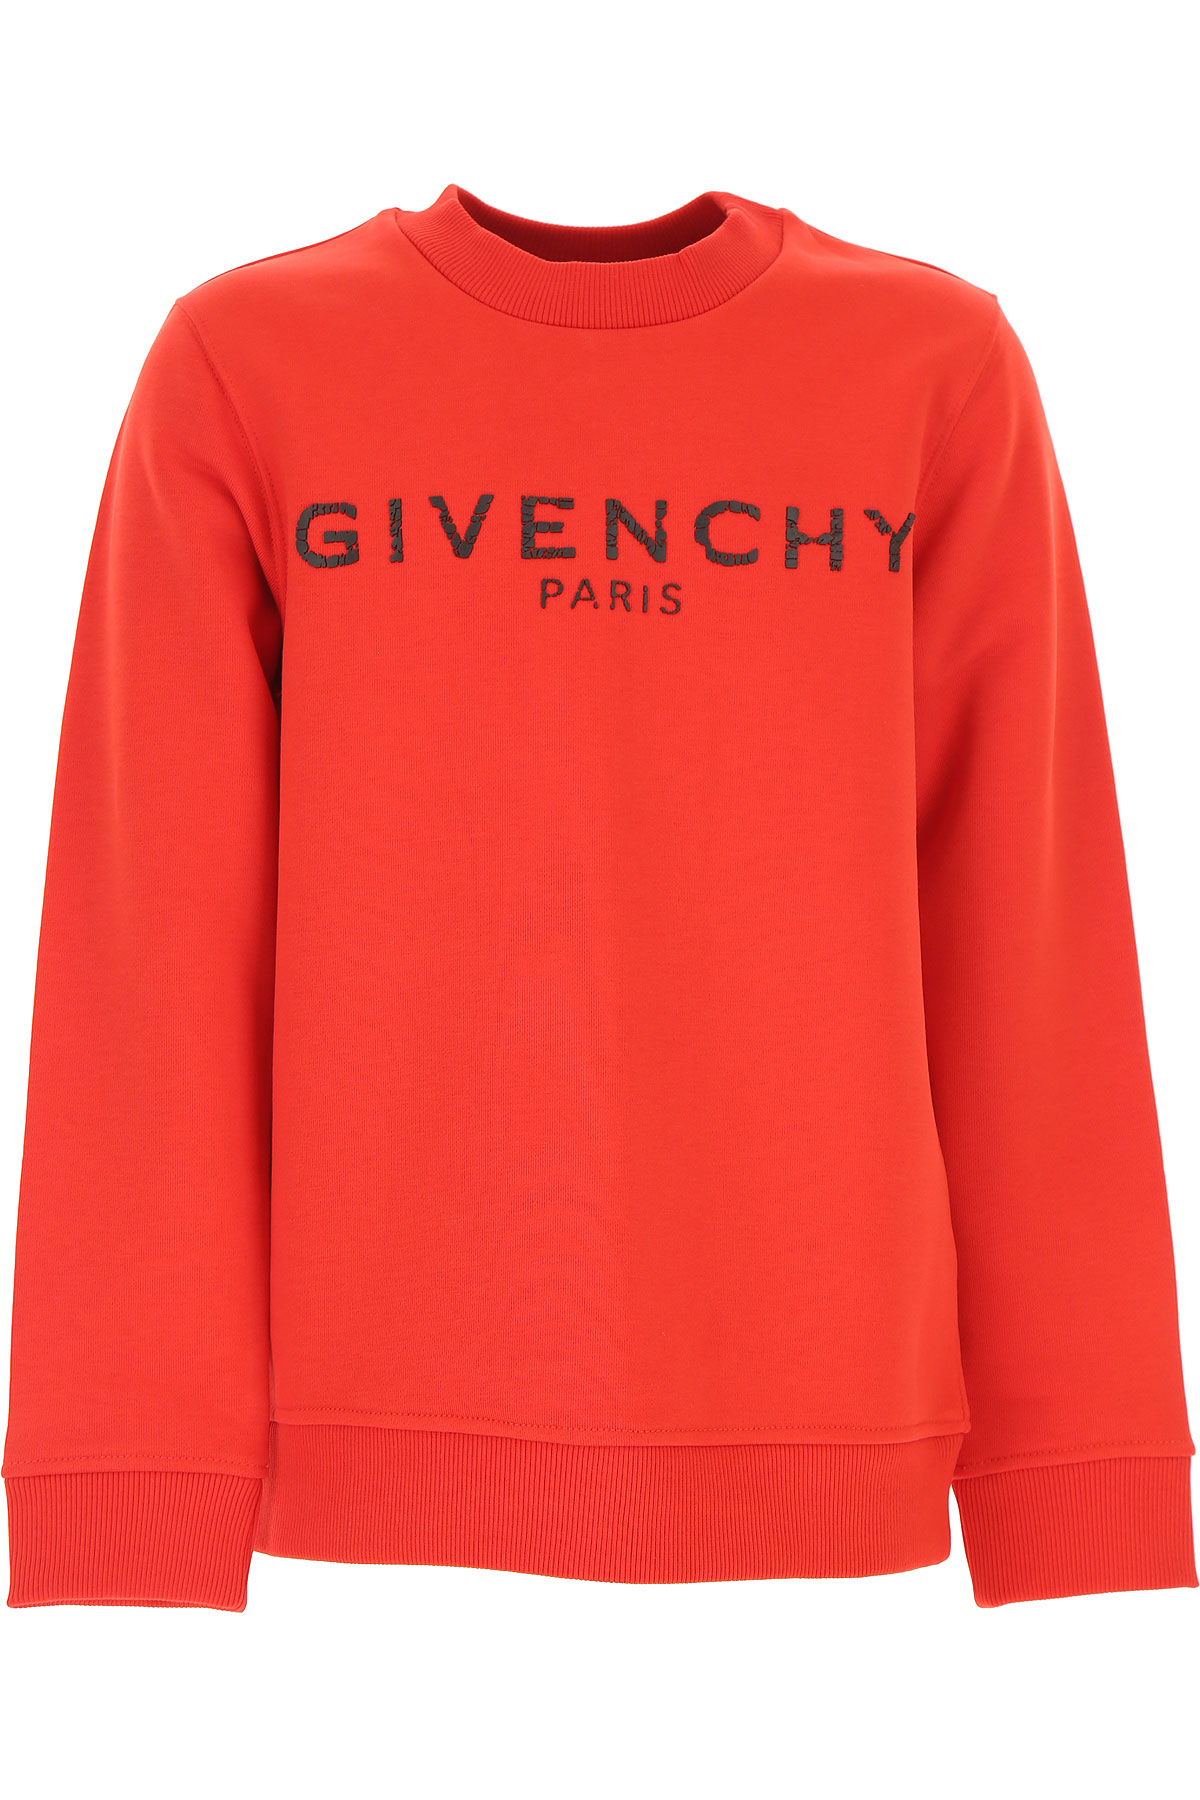 Girls Clothing Givenchy, Style code: h25145-991-